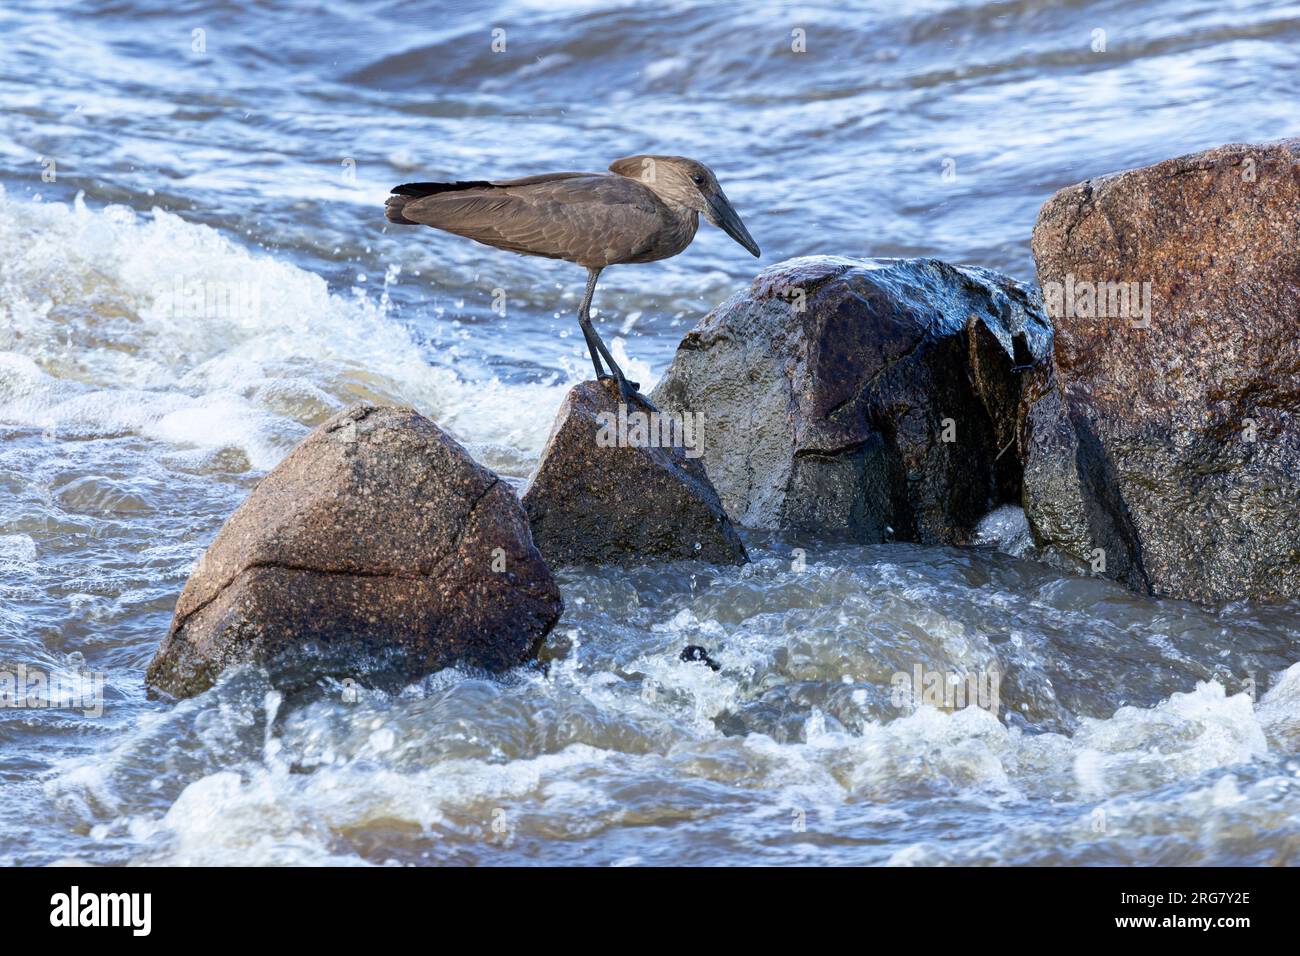 The Hamerkop is a bird steeped in myths and legends around Africa. They have a distinctive call and can be found by any water, from temporary puddles. Stock Photo